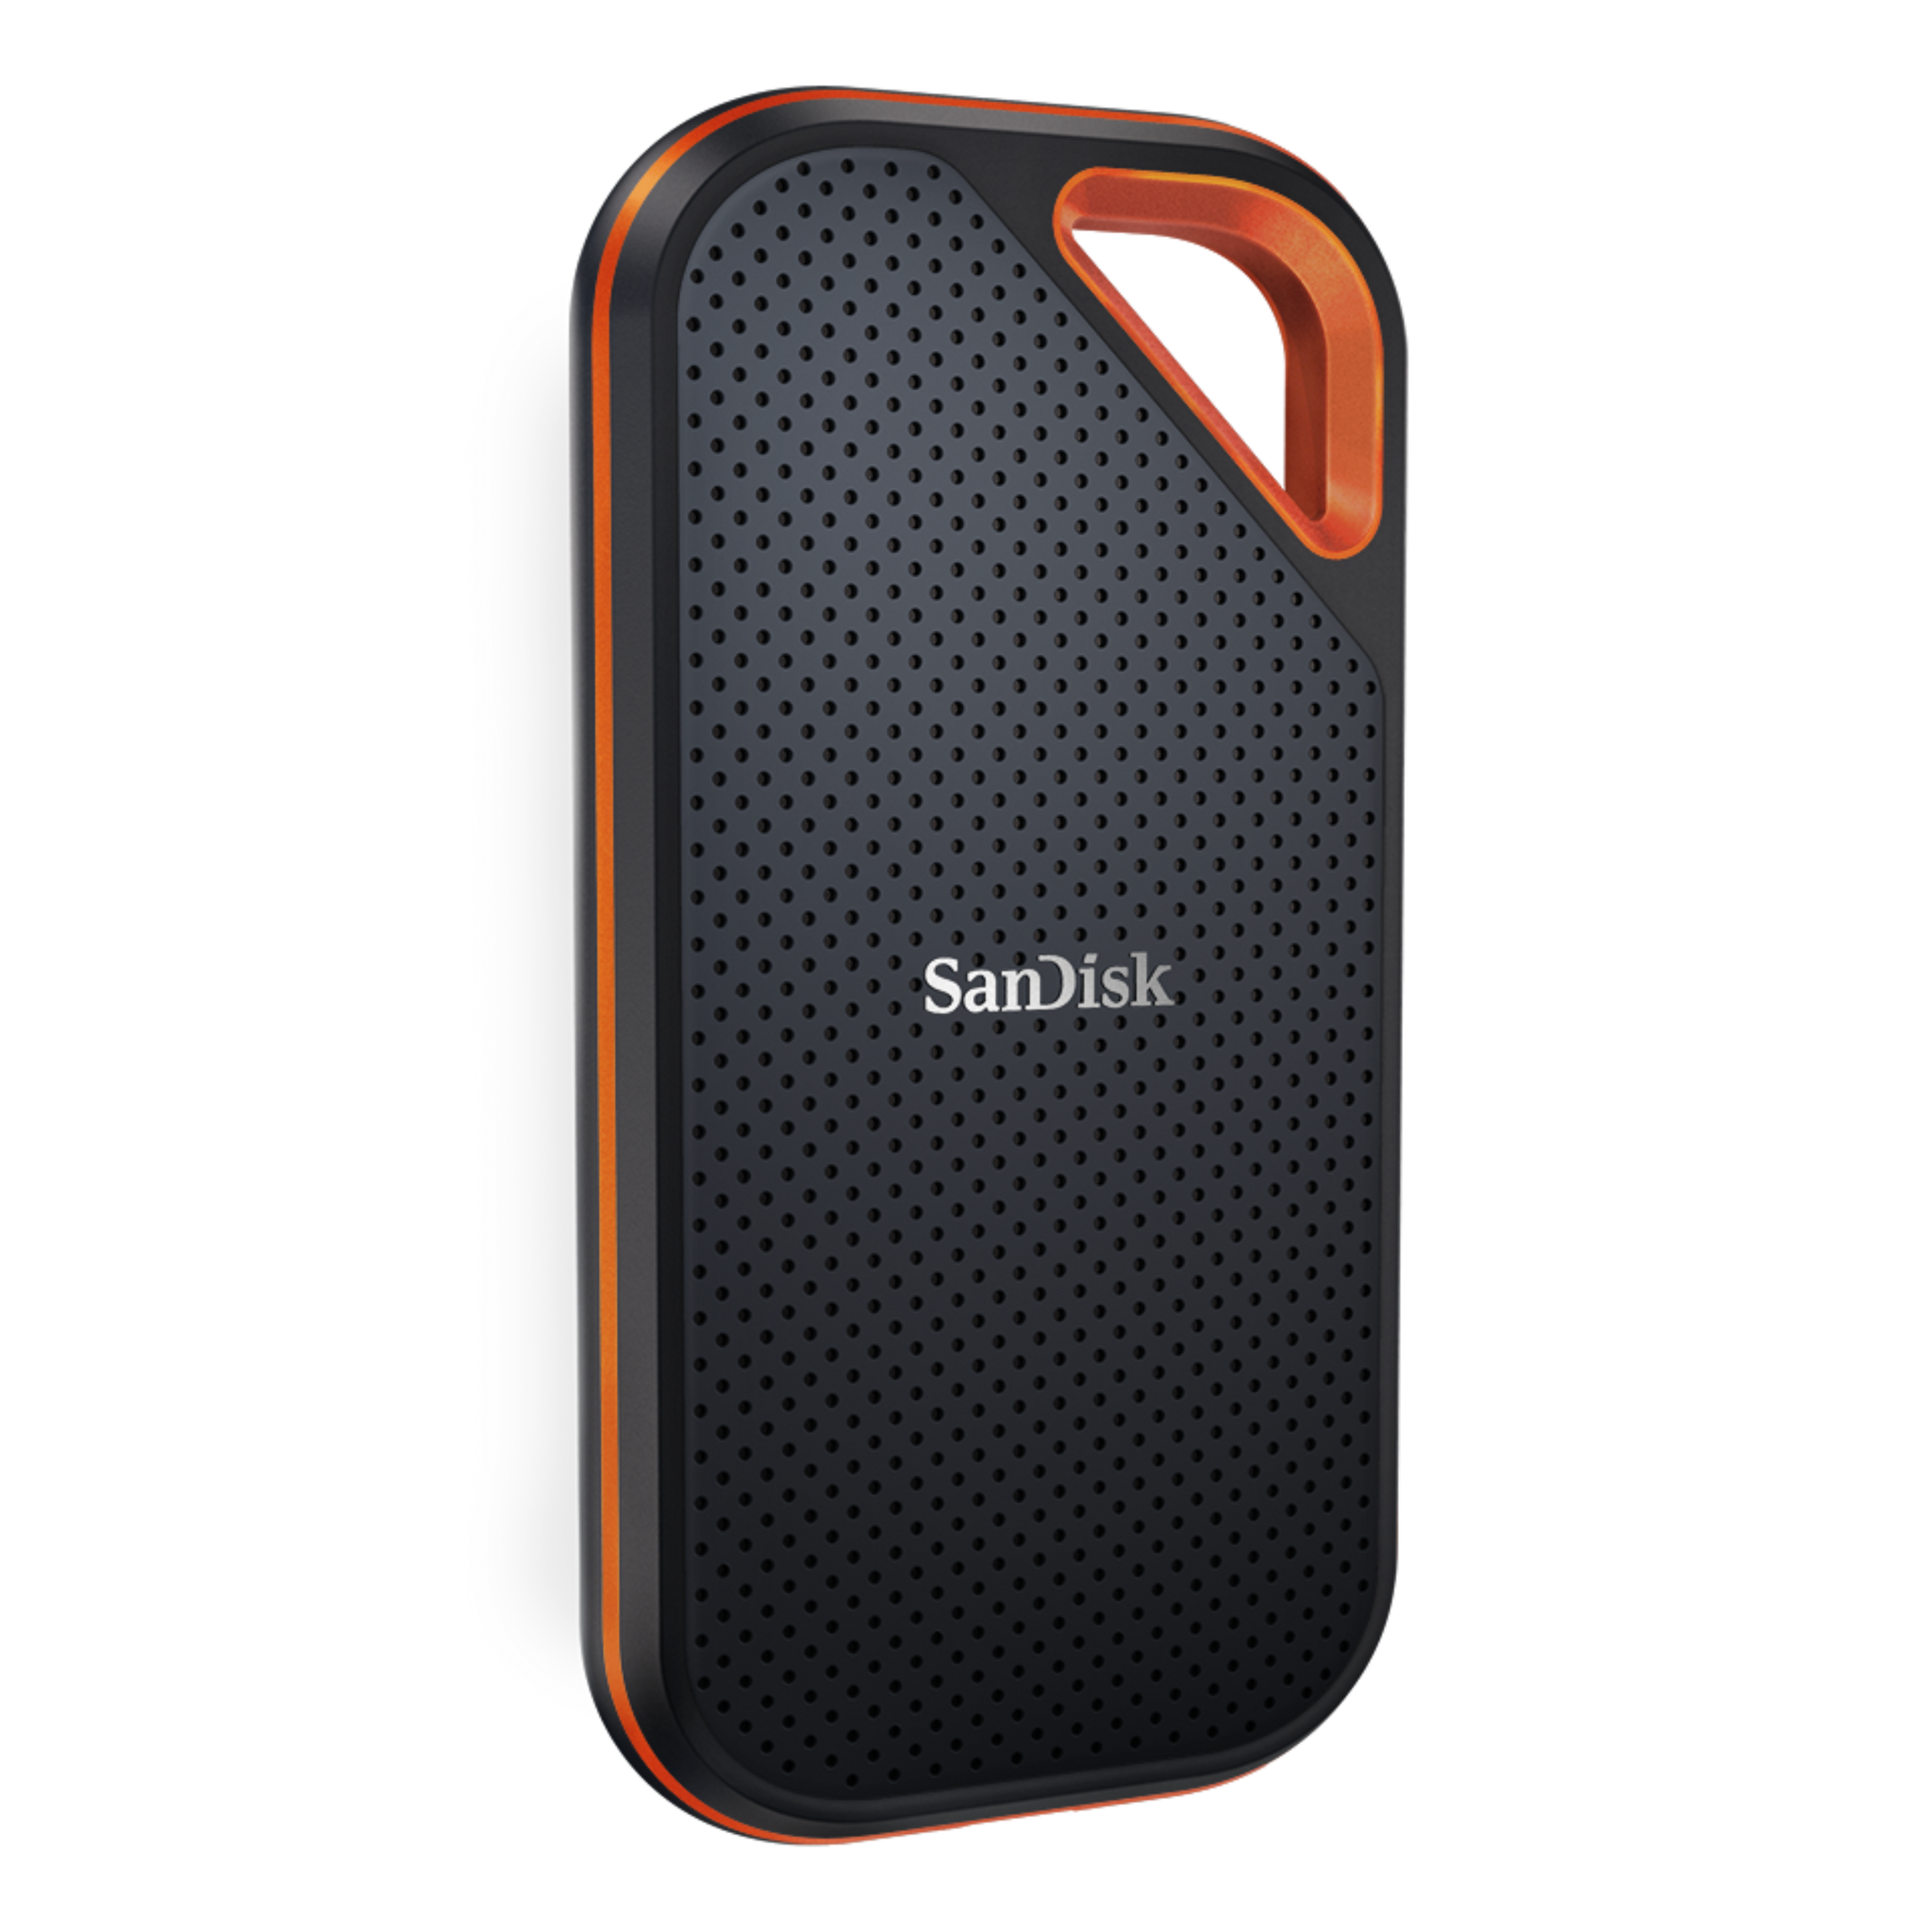 SanDisk Extreme Pro Portable SSD E81 2000MB/s USB 3.1 for Windows & Mac Type-C Type-A IP55 Dust and Water-Resistant-Data Storage-futuromic